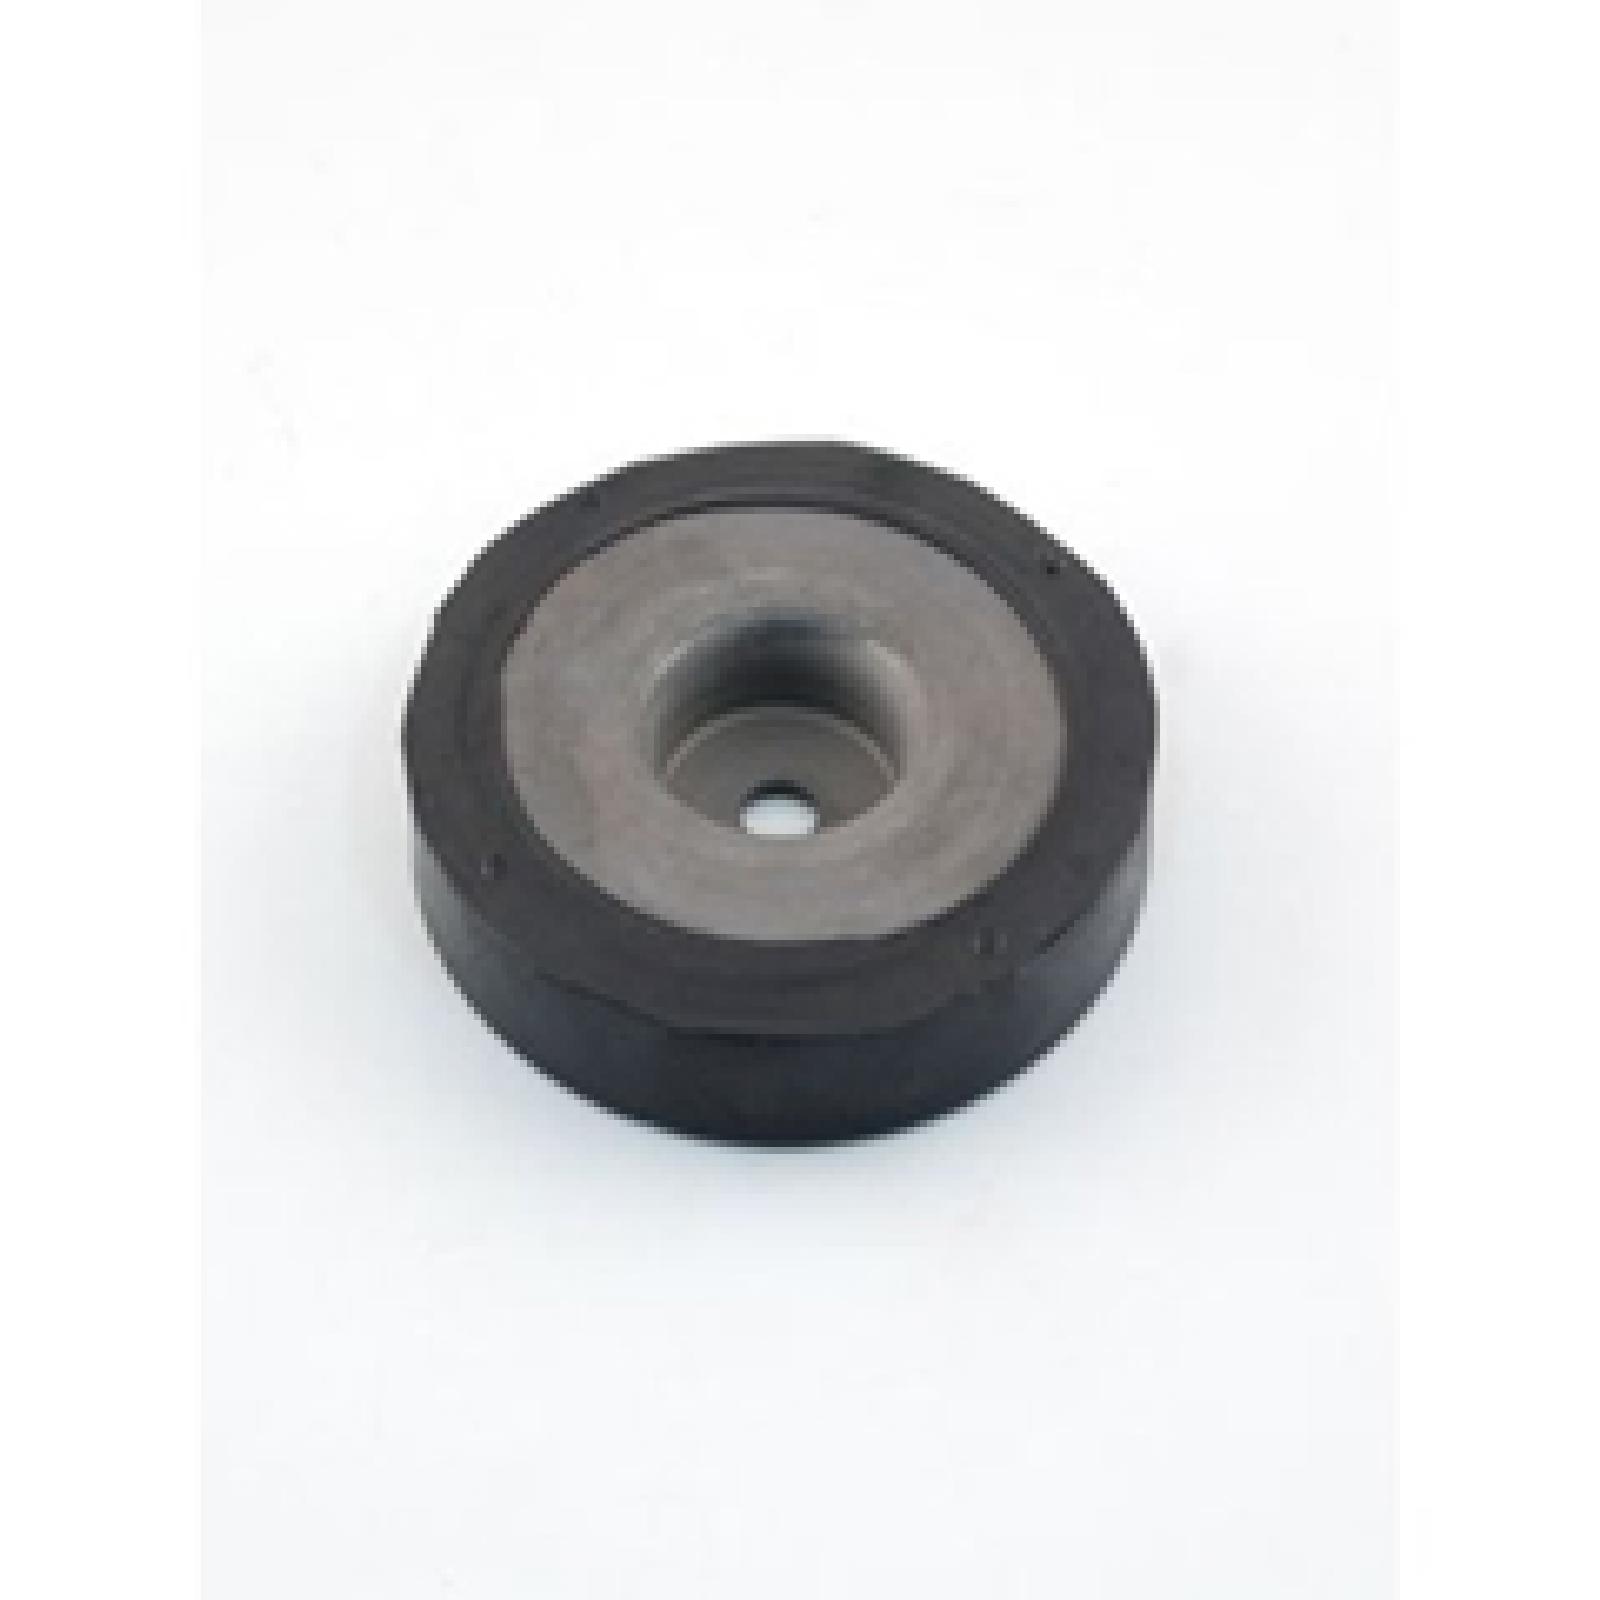 DISC REVERSE part# 756-04171 by MTD